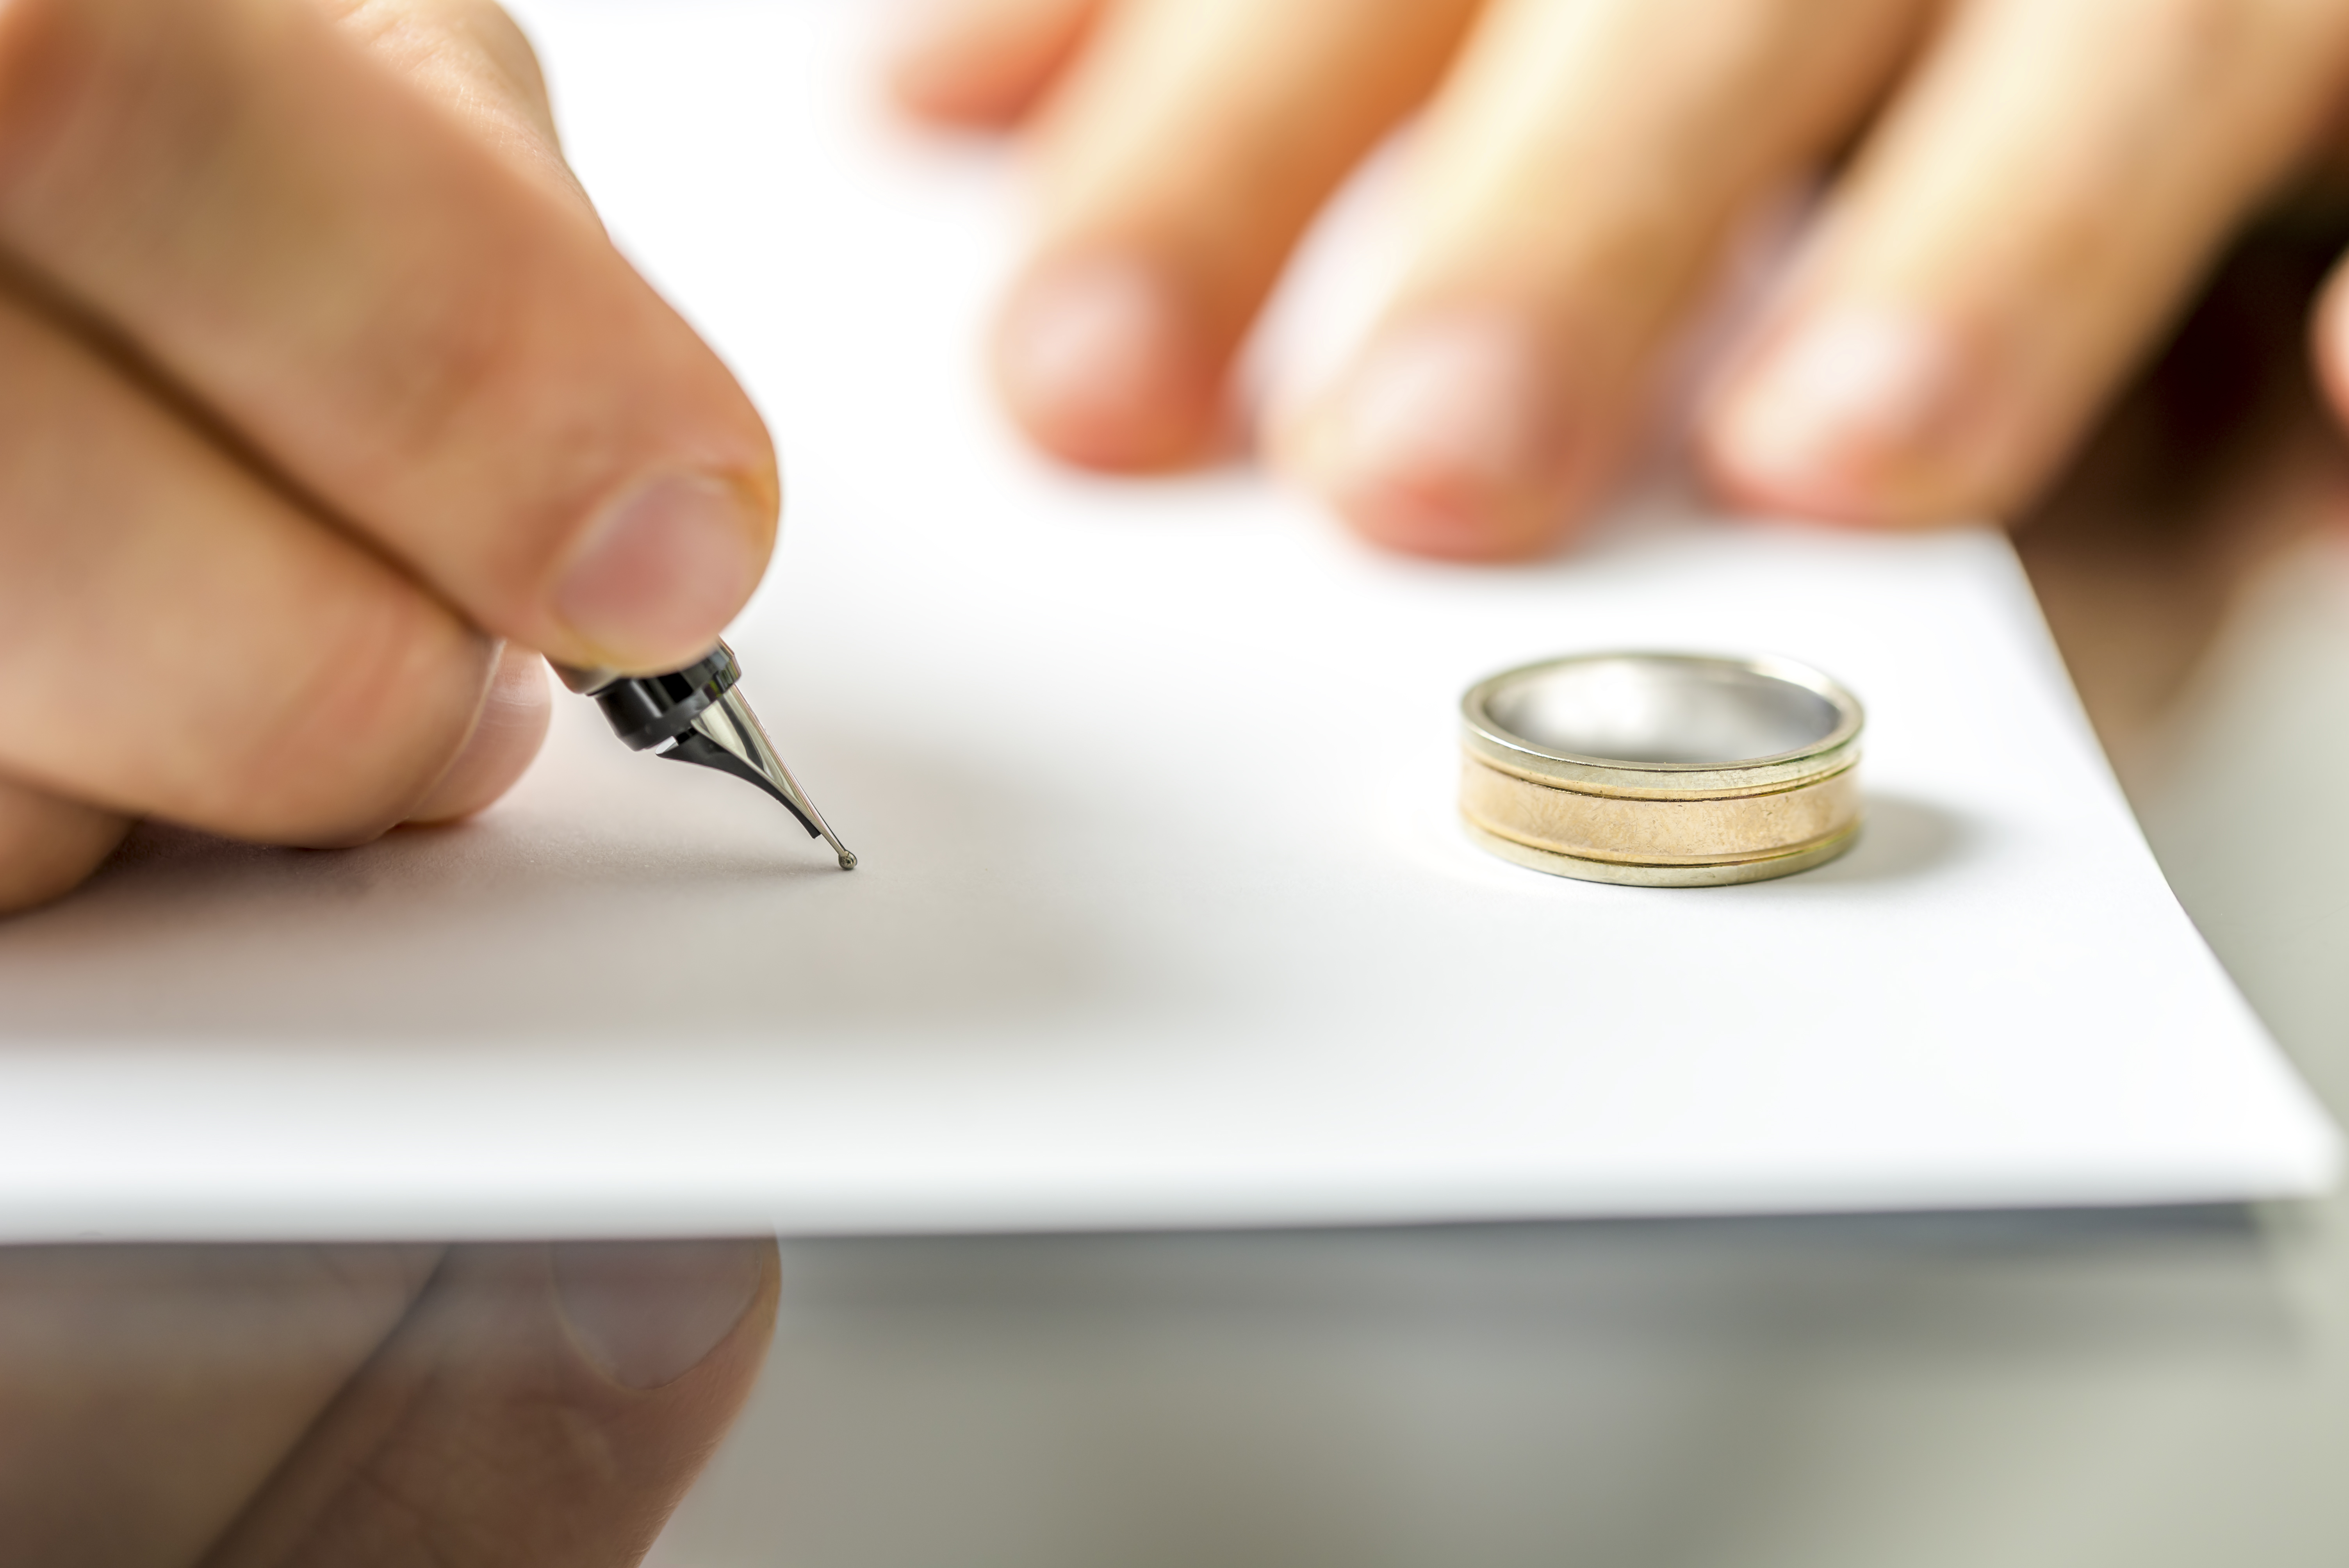 Late Life Divorce In California: What Are Some Special Issues?